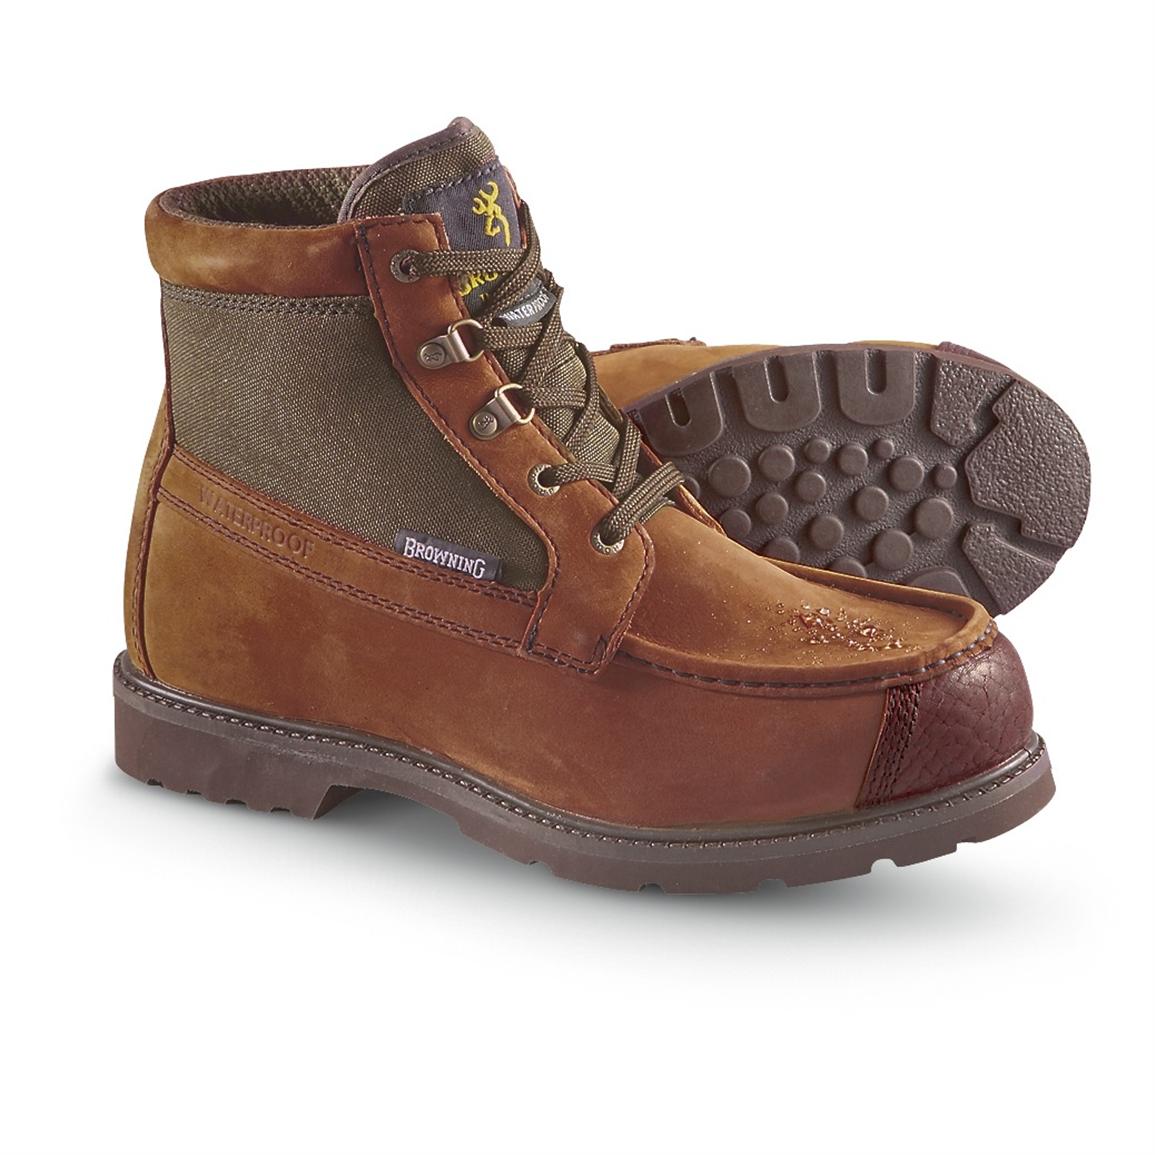 Browning Leather Boots | vlr.eng.br